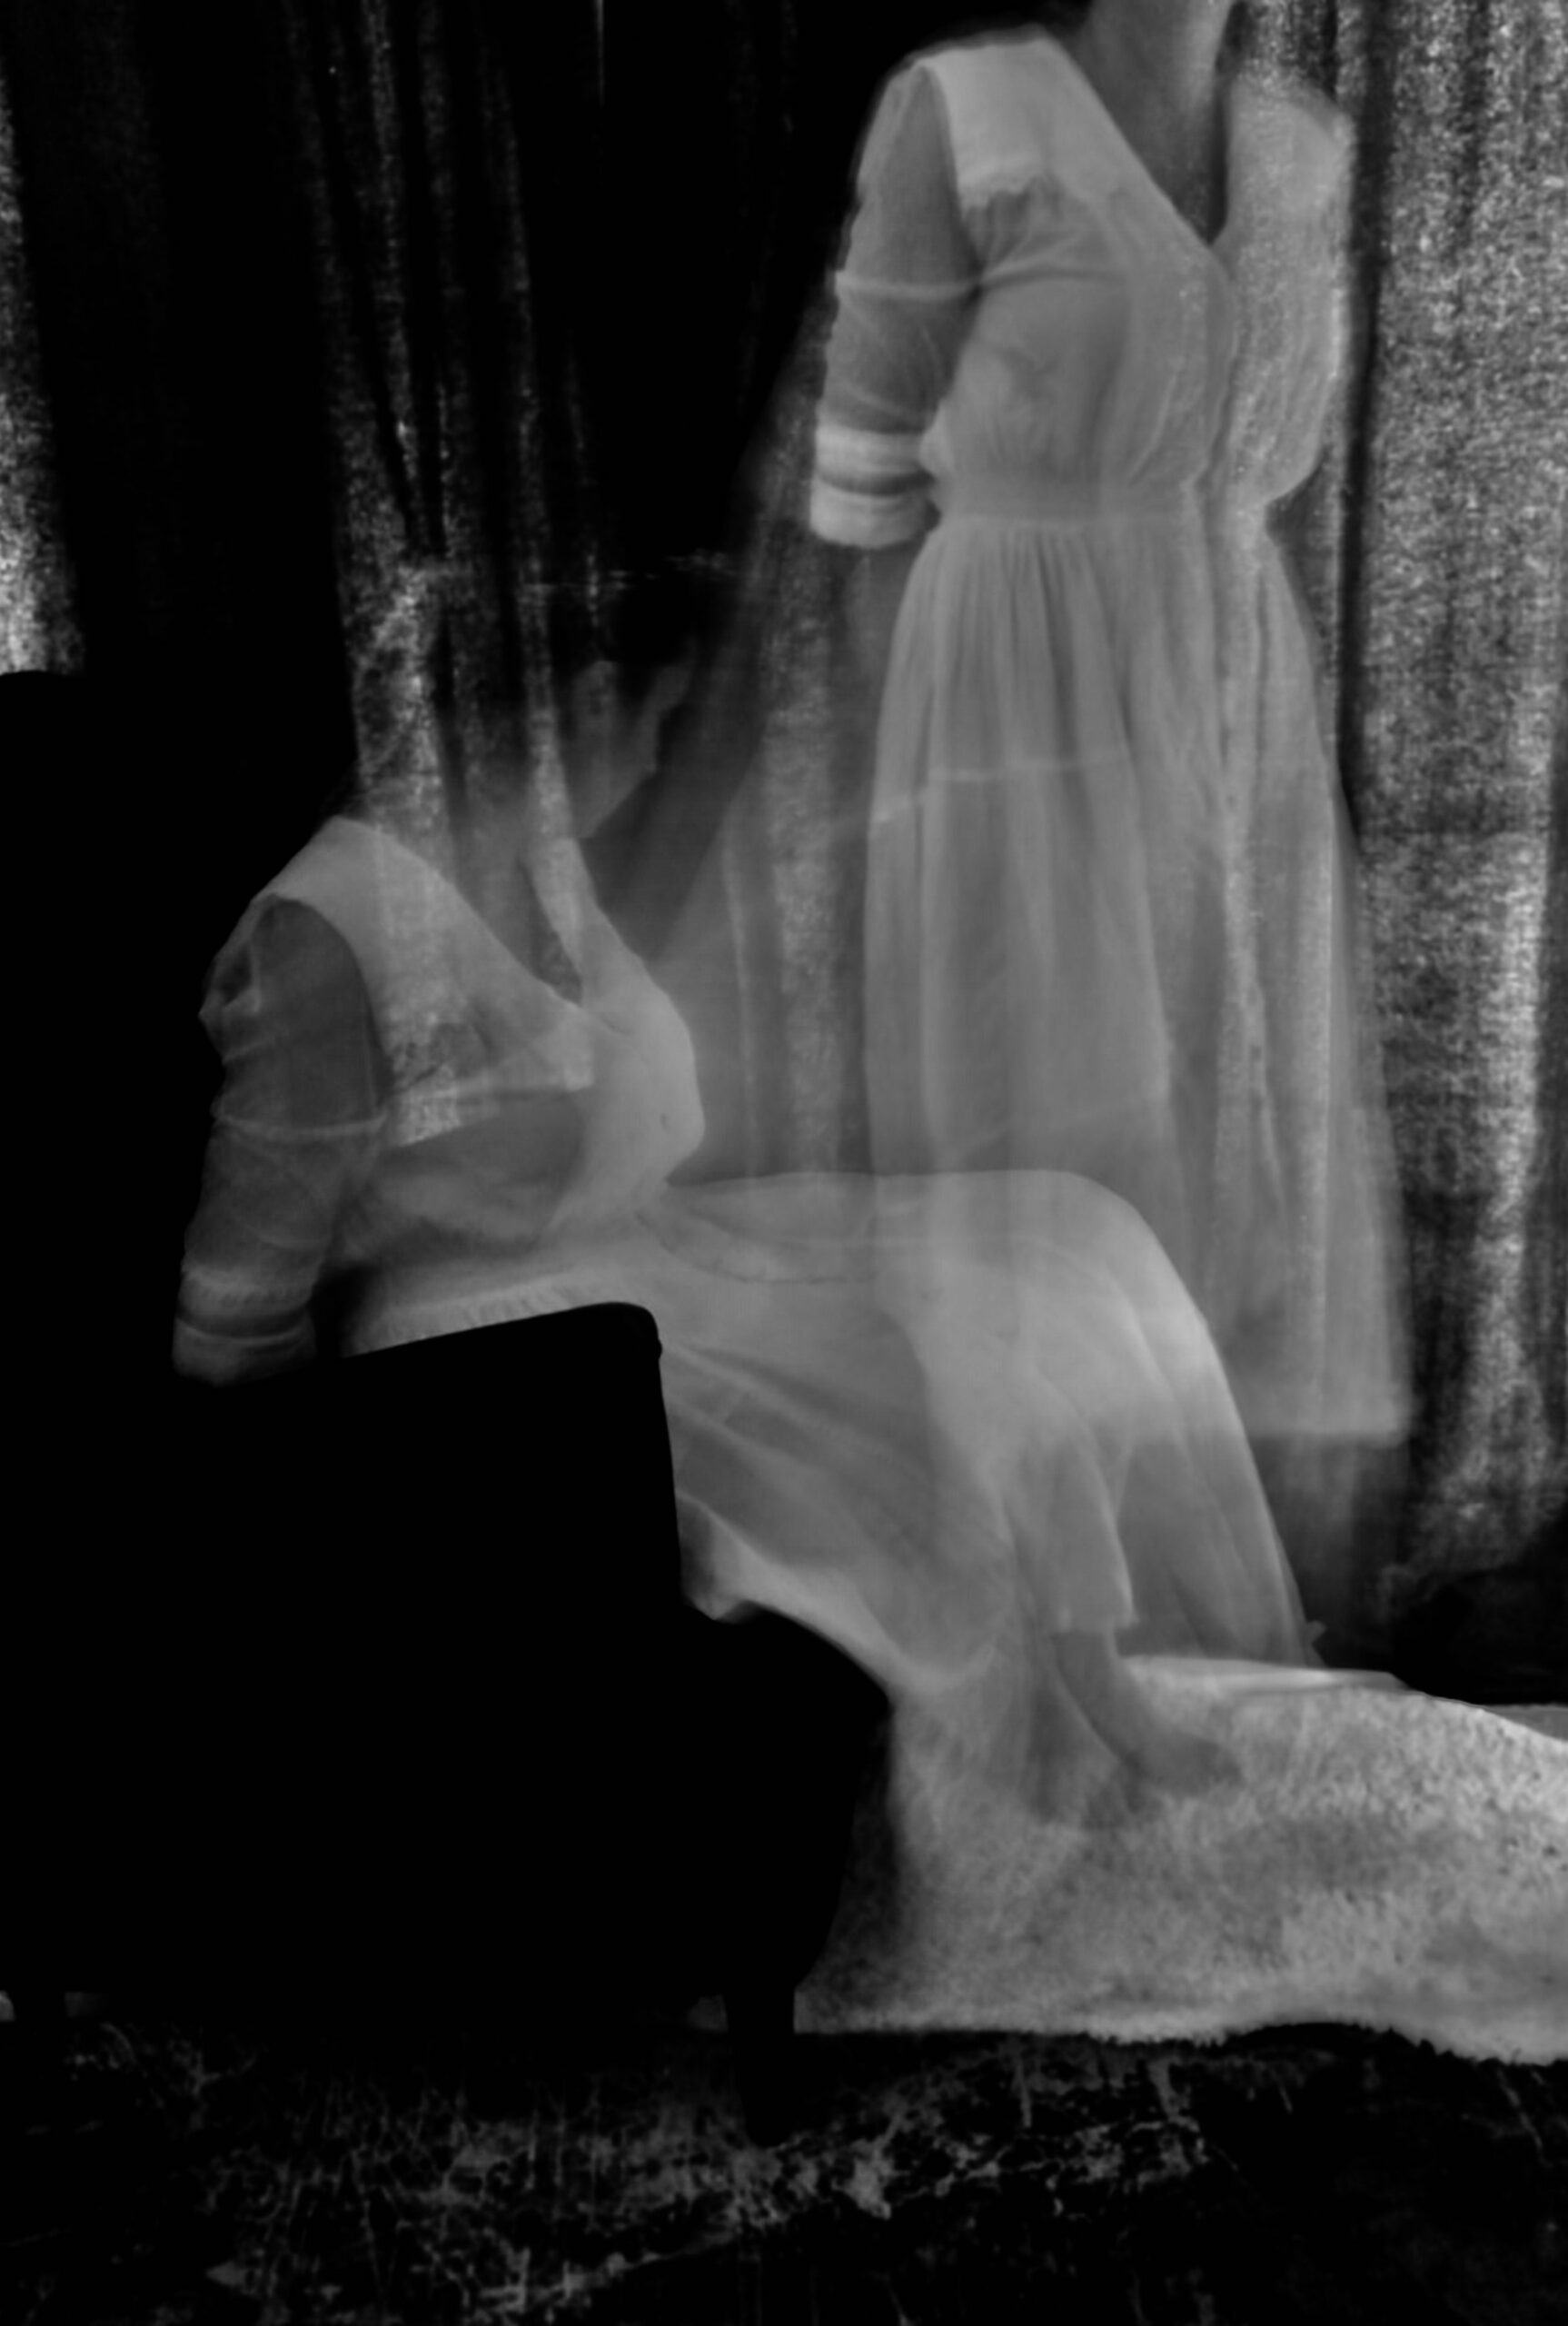 A ghost figure in black and white.